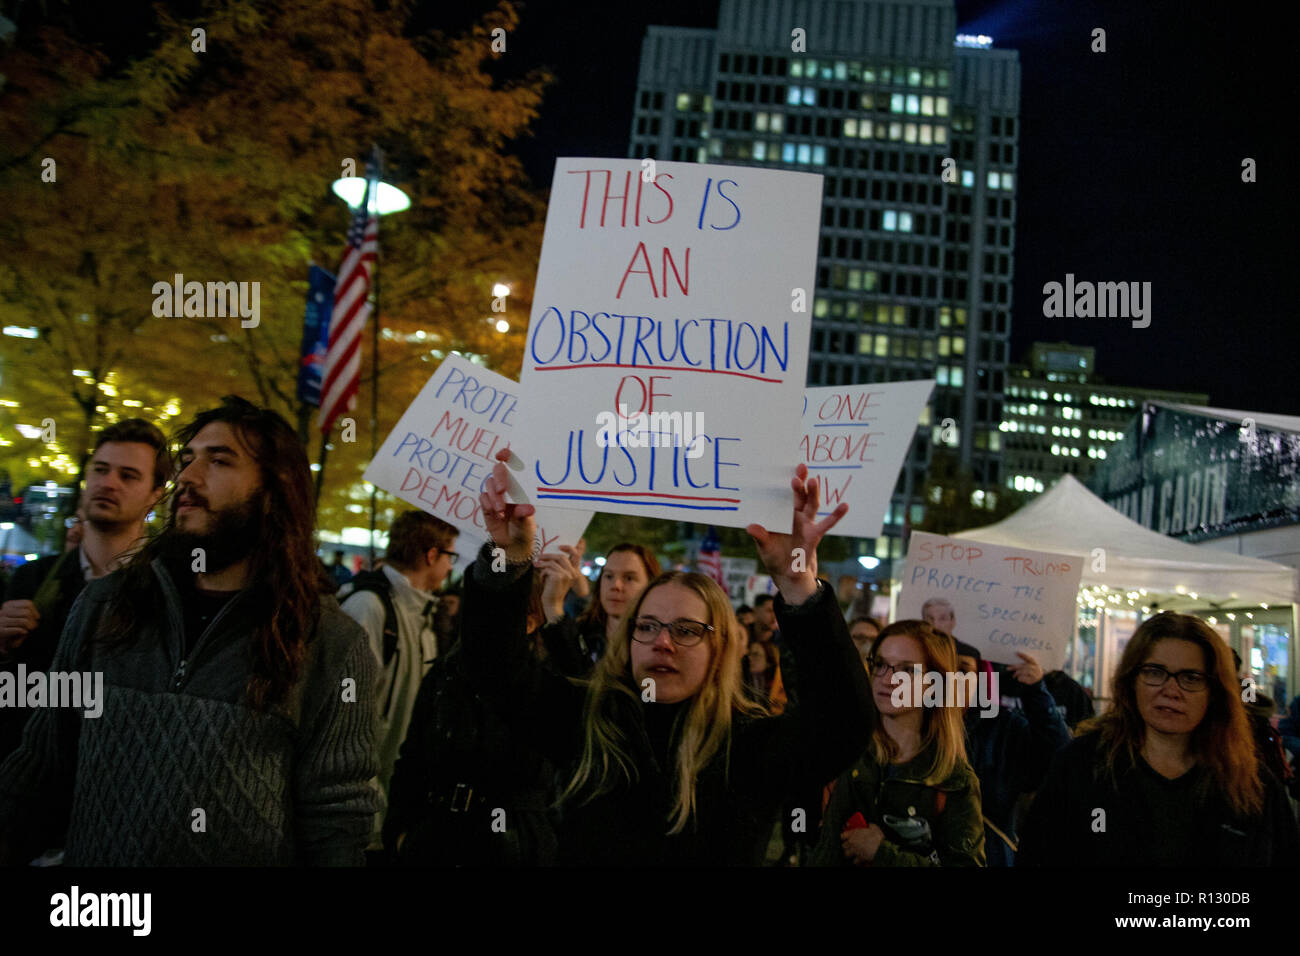 Philadelphia, Pennsylvania, USA. November 8, 2018 - Hundreds of protestors gather and march in Philadelphia, November 8, 2018 in an event pre-planned by organizers and triggered by President Trump's firing of Attorney General Sessions and appointment of Matthew Whitaker as Acting AG, seen as a potential threat against the Mueller investigation. Credit: Michael Candelori/ZUMA Wire/Alamy Live News Stock Photo